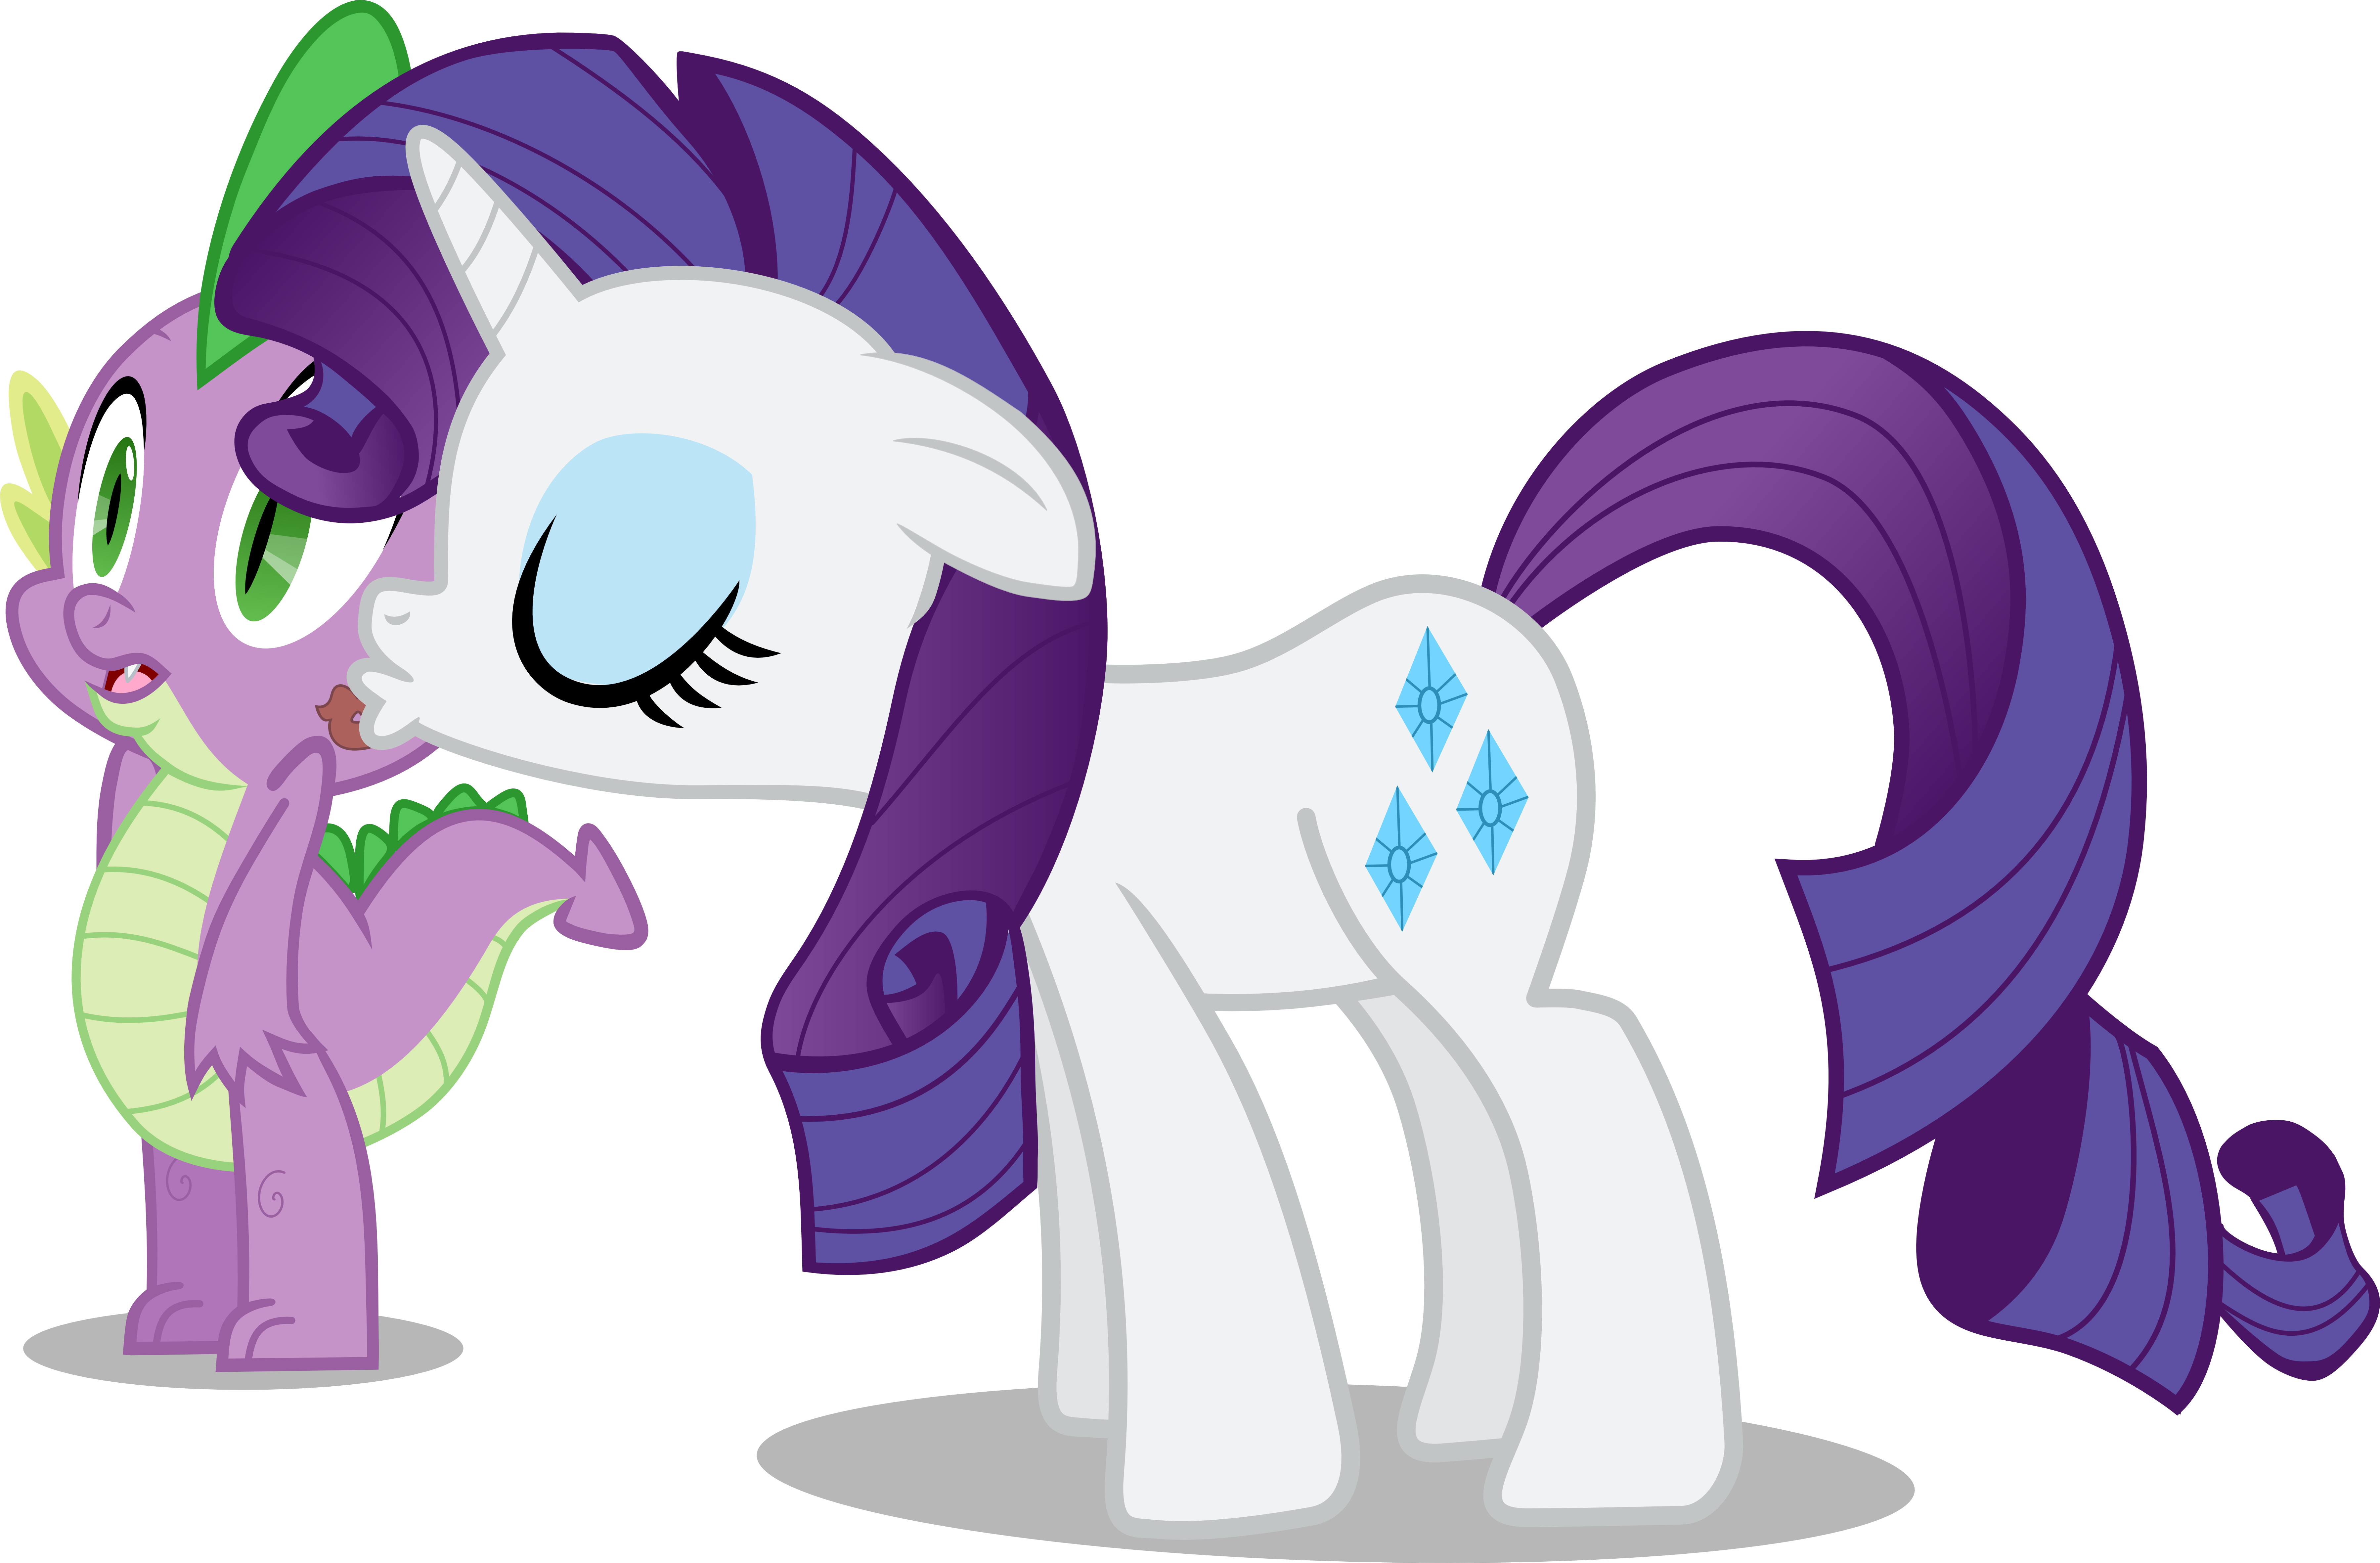 rarity_kissing_spike_by_exe2001-d4vt98z.png